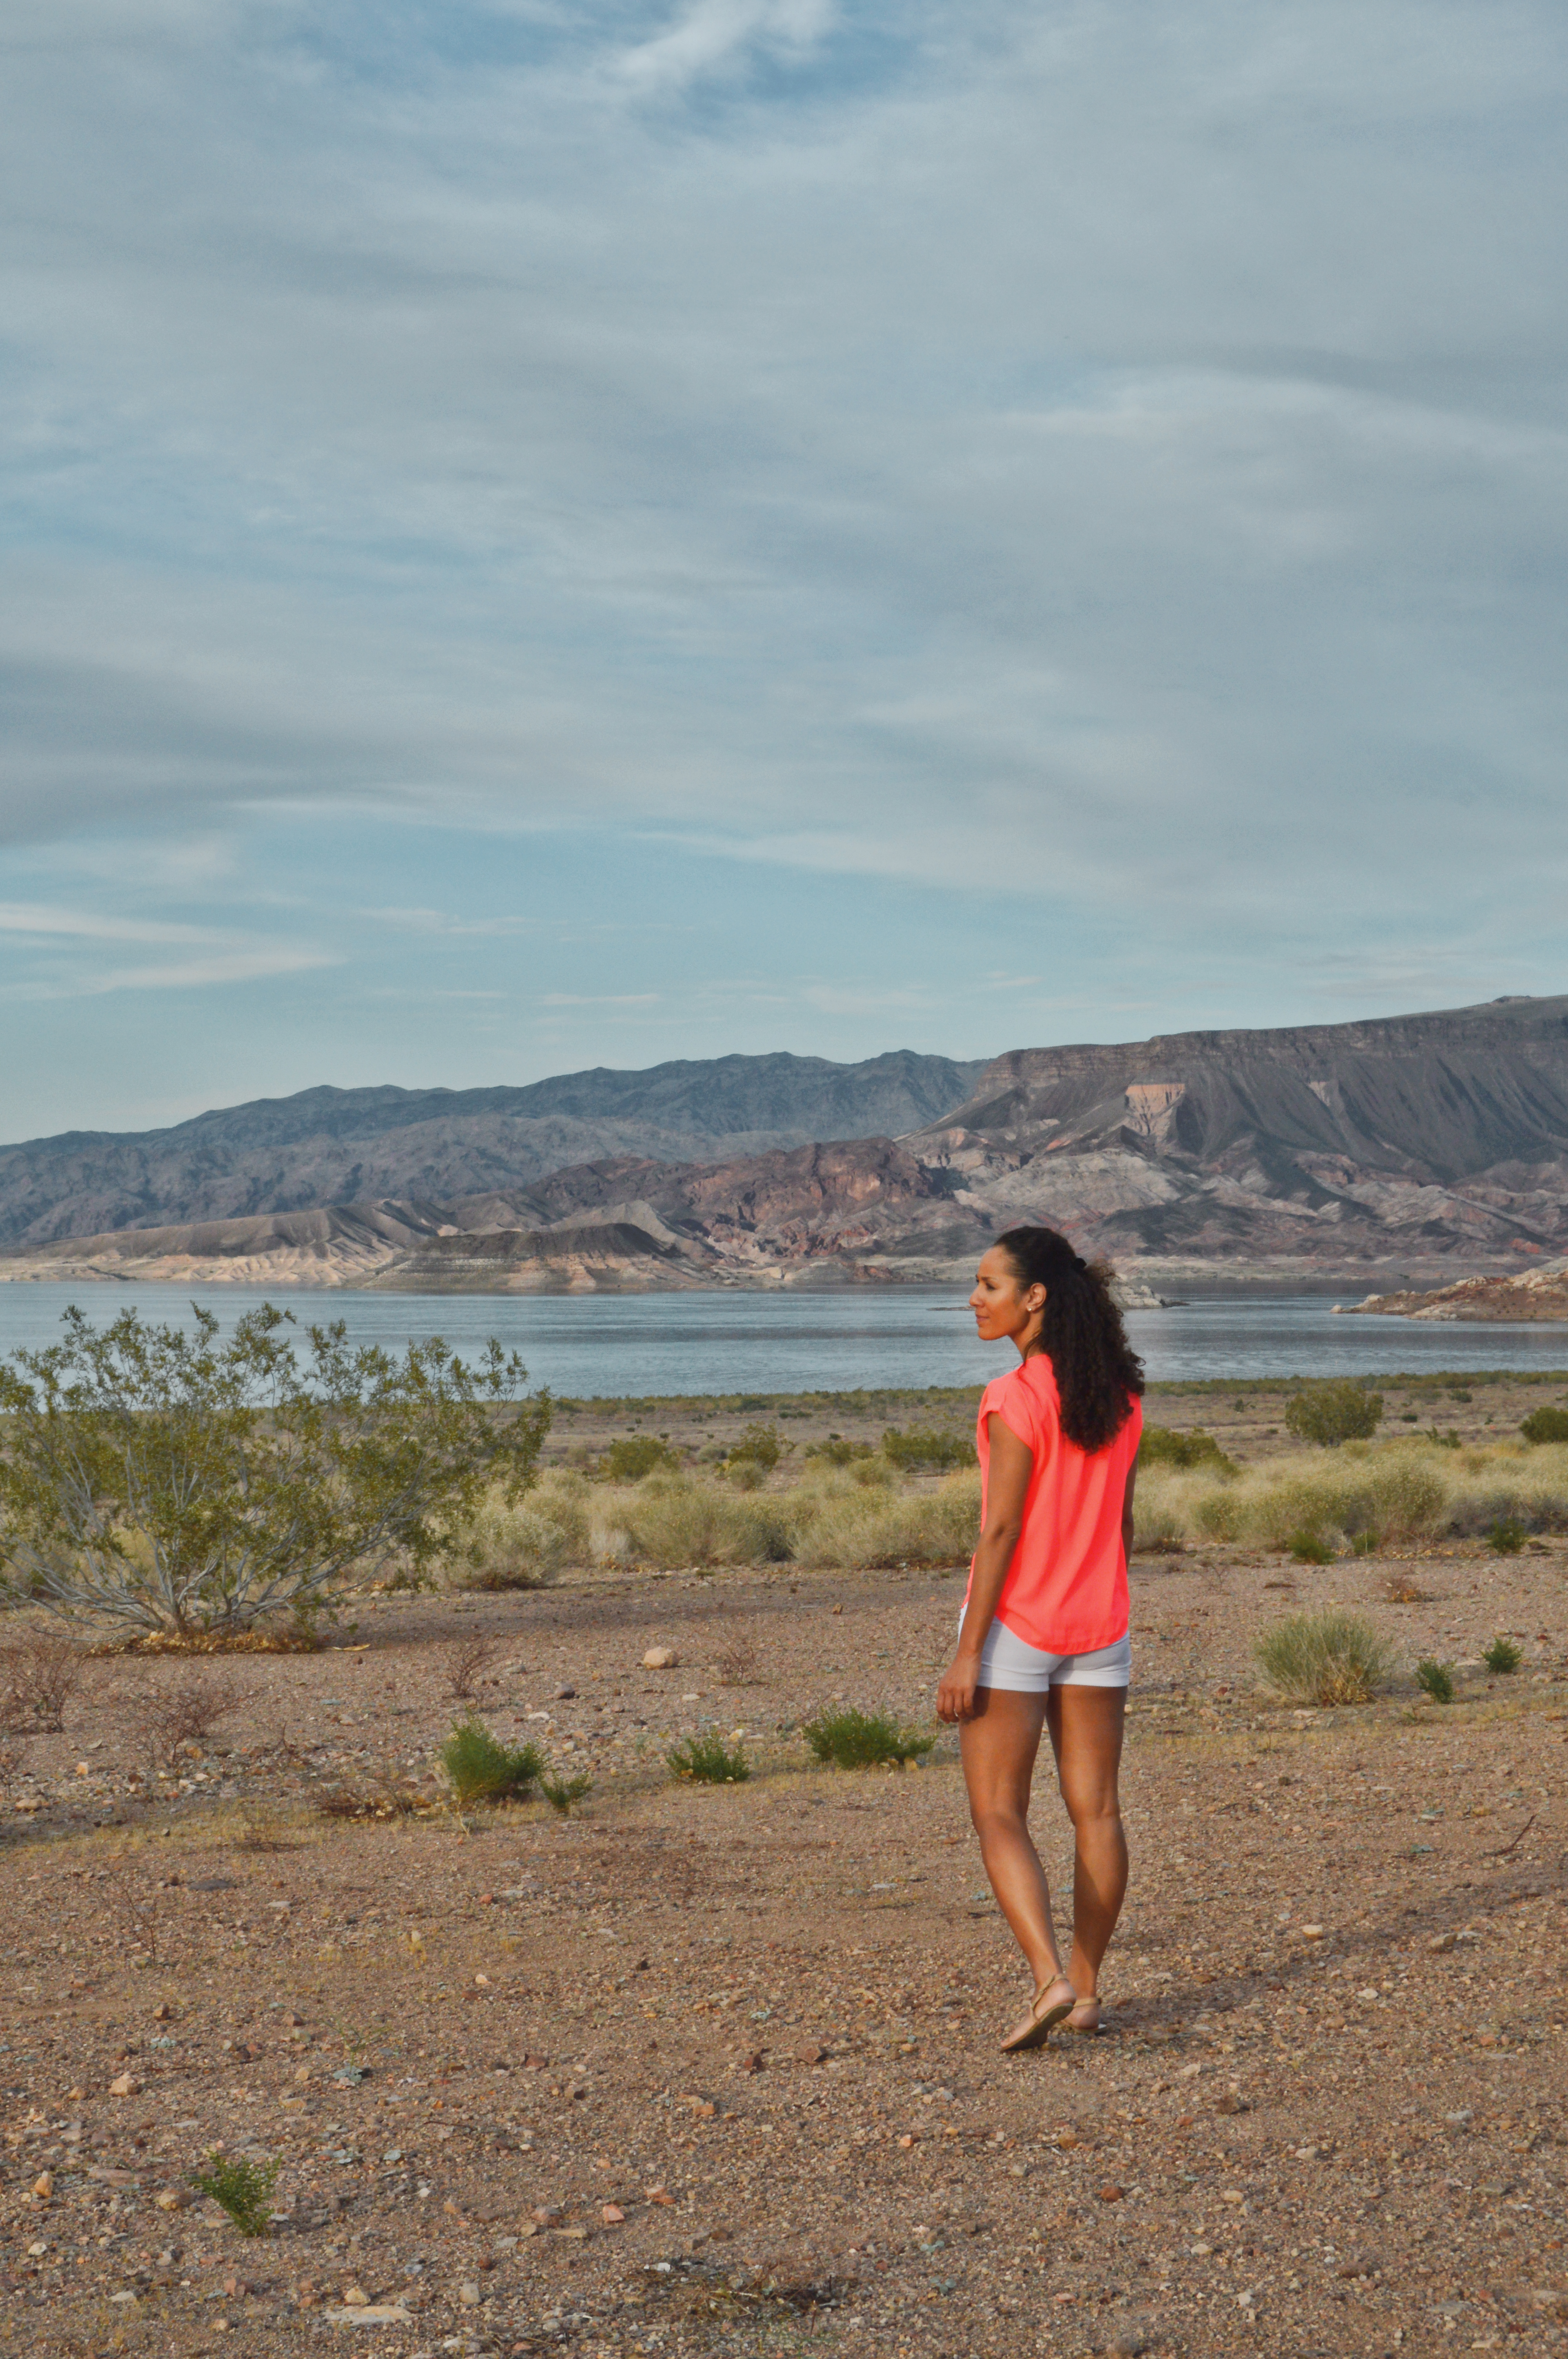 Watching the sunset at Lake Mead in Las Vegas